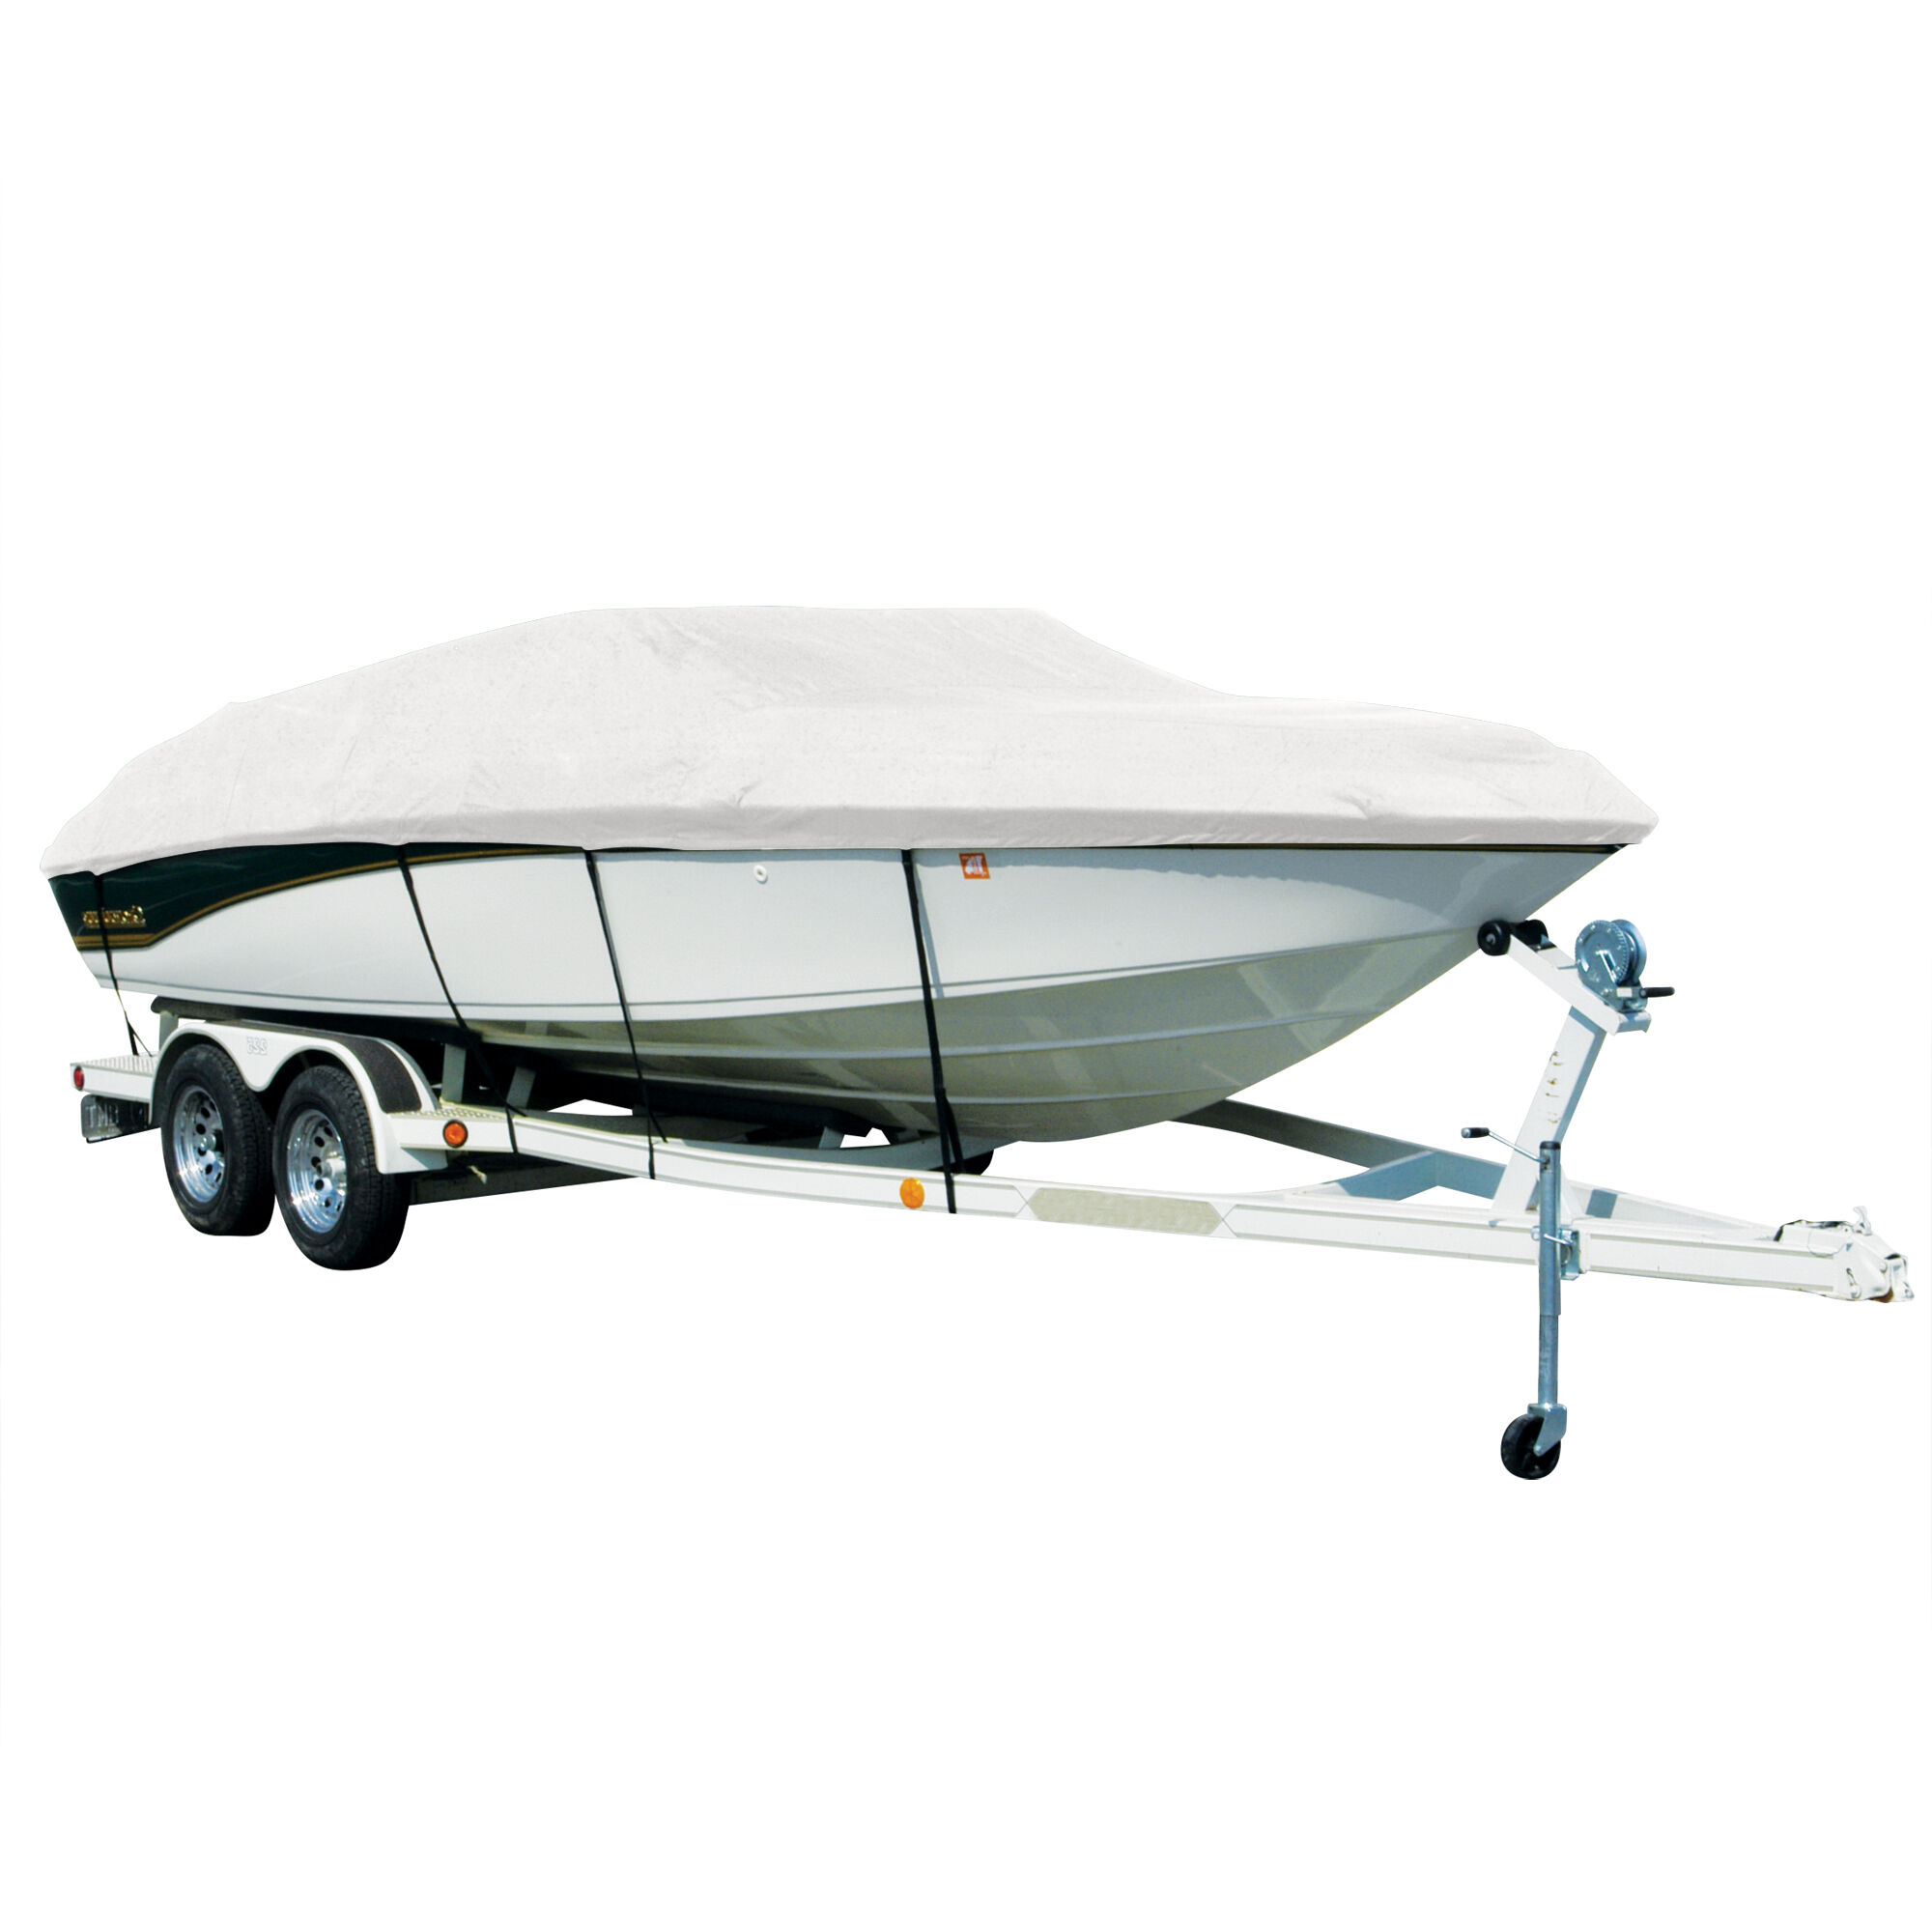 Covermate Sharkskin Plus Exact-Fit Cover for Larson All American 170 All American 170 Bowrider O/B. White Boat Cover Polyester